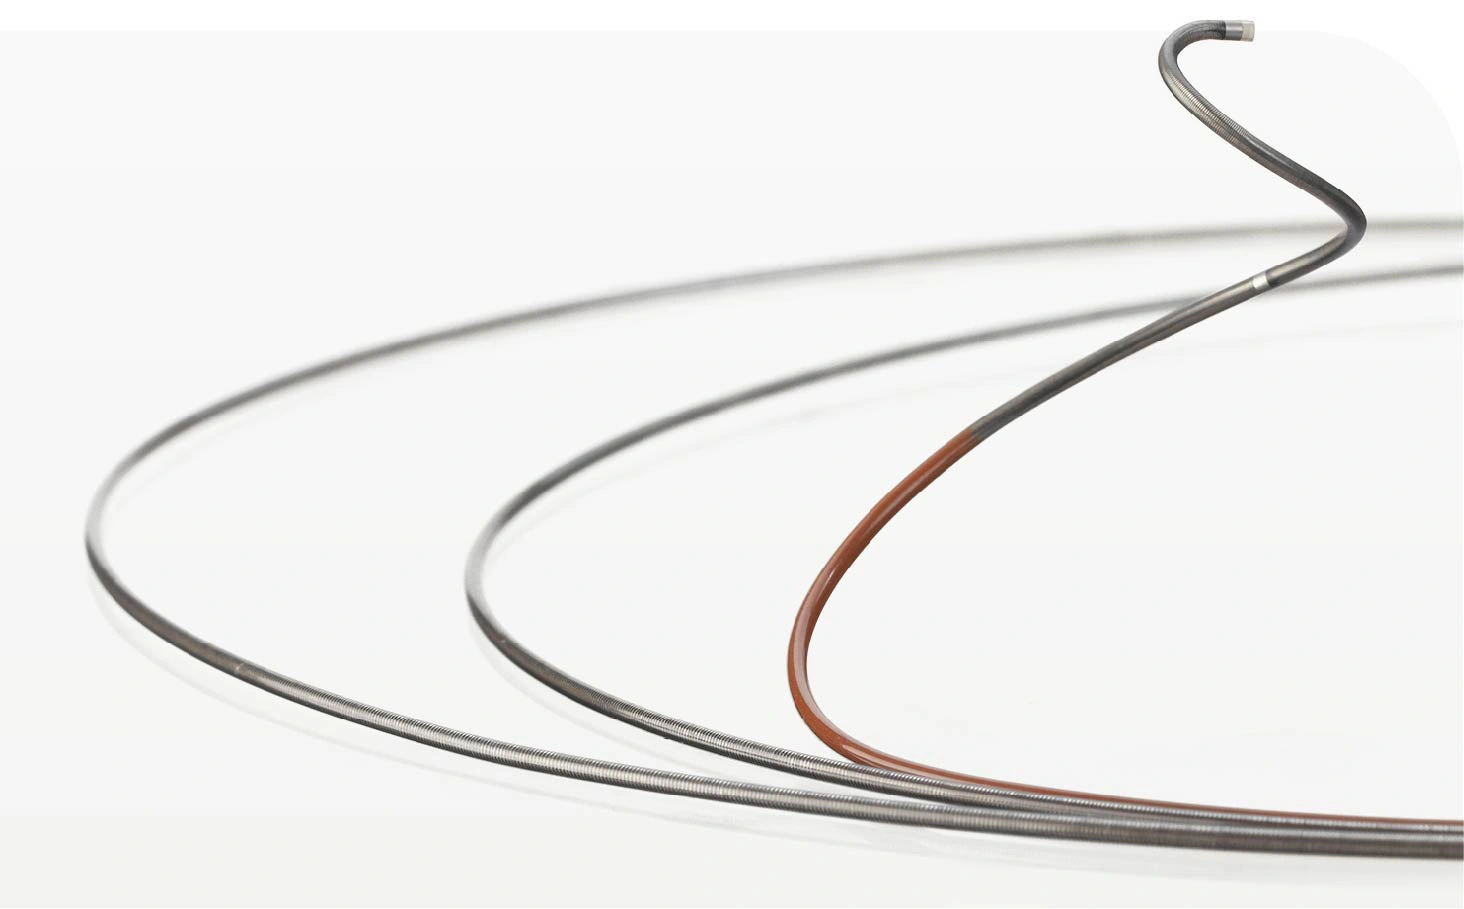 Tip and Body of PX Slim Delivery Microcatheter for use with in delivering other coils